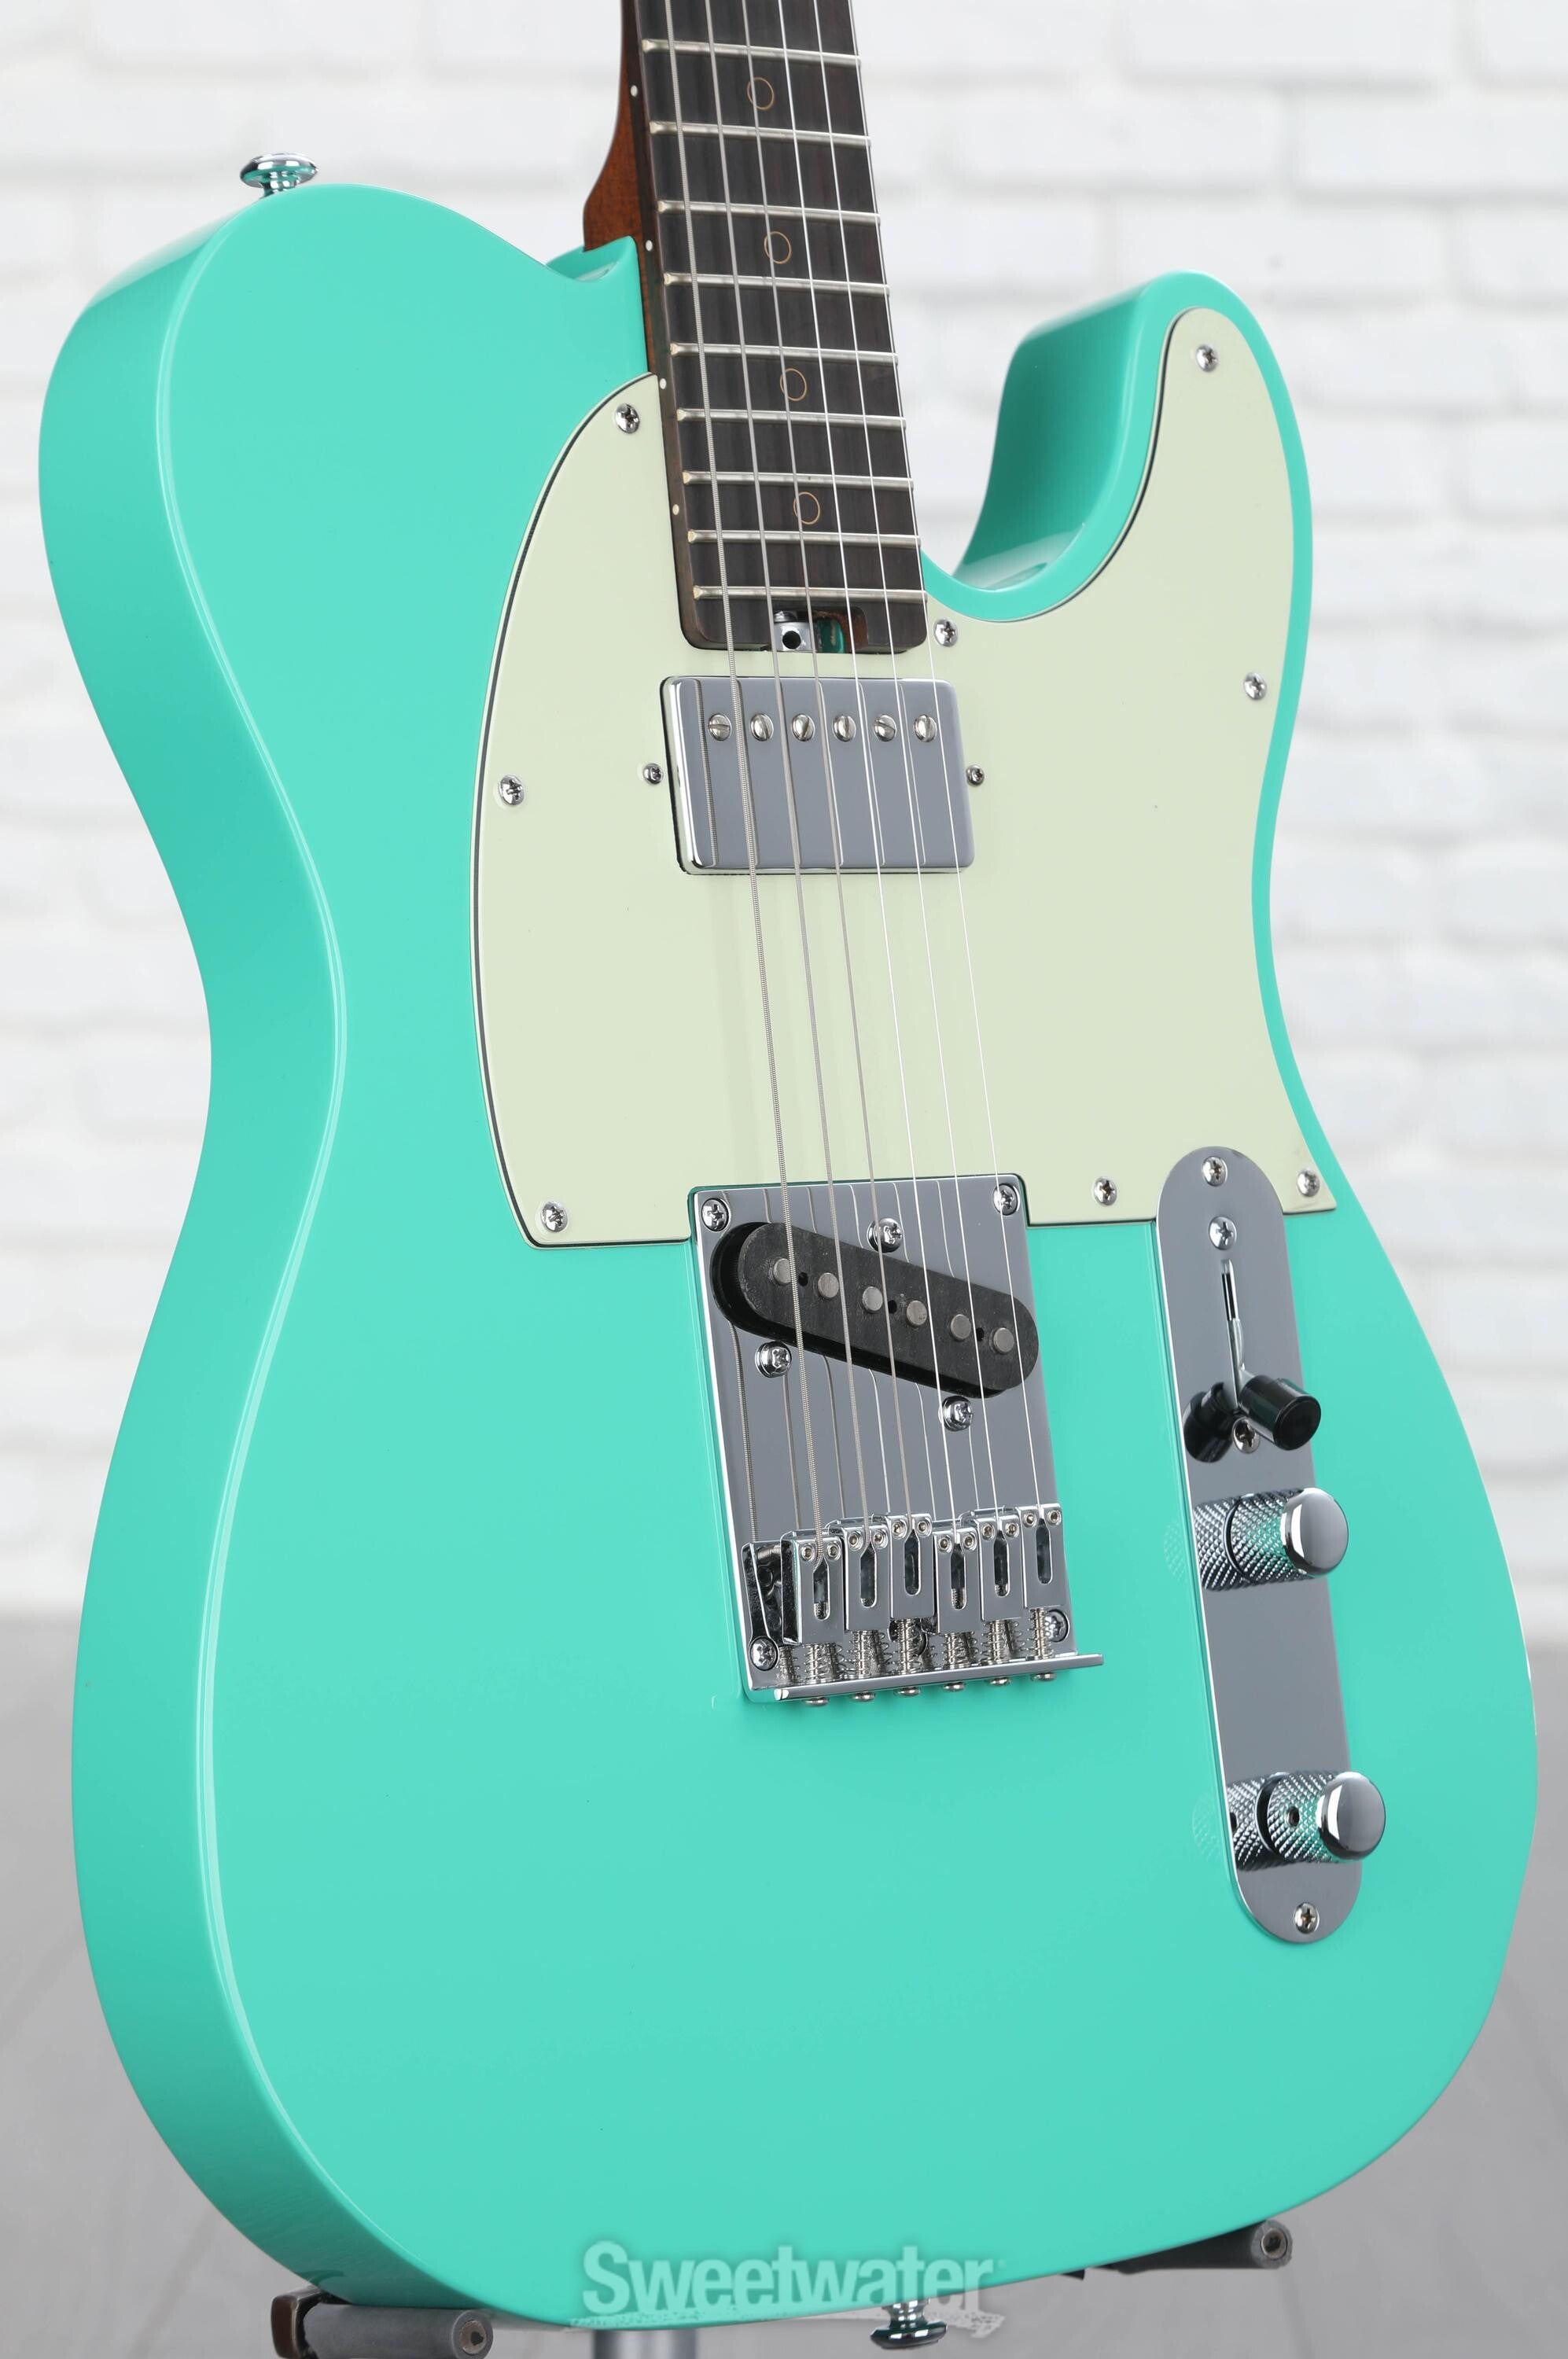 Schecter Nick Johnston Signature PT Electric Guitar - Atomic Green |  Sweetwater